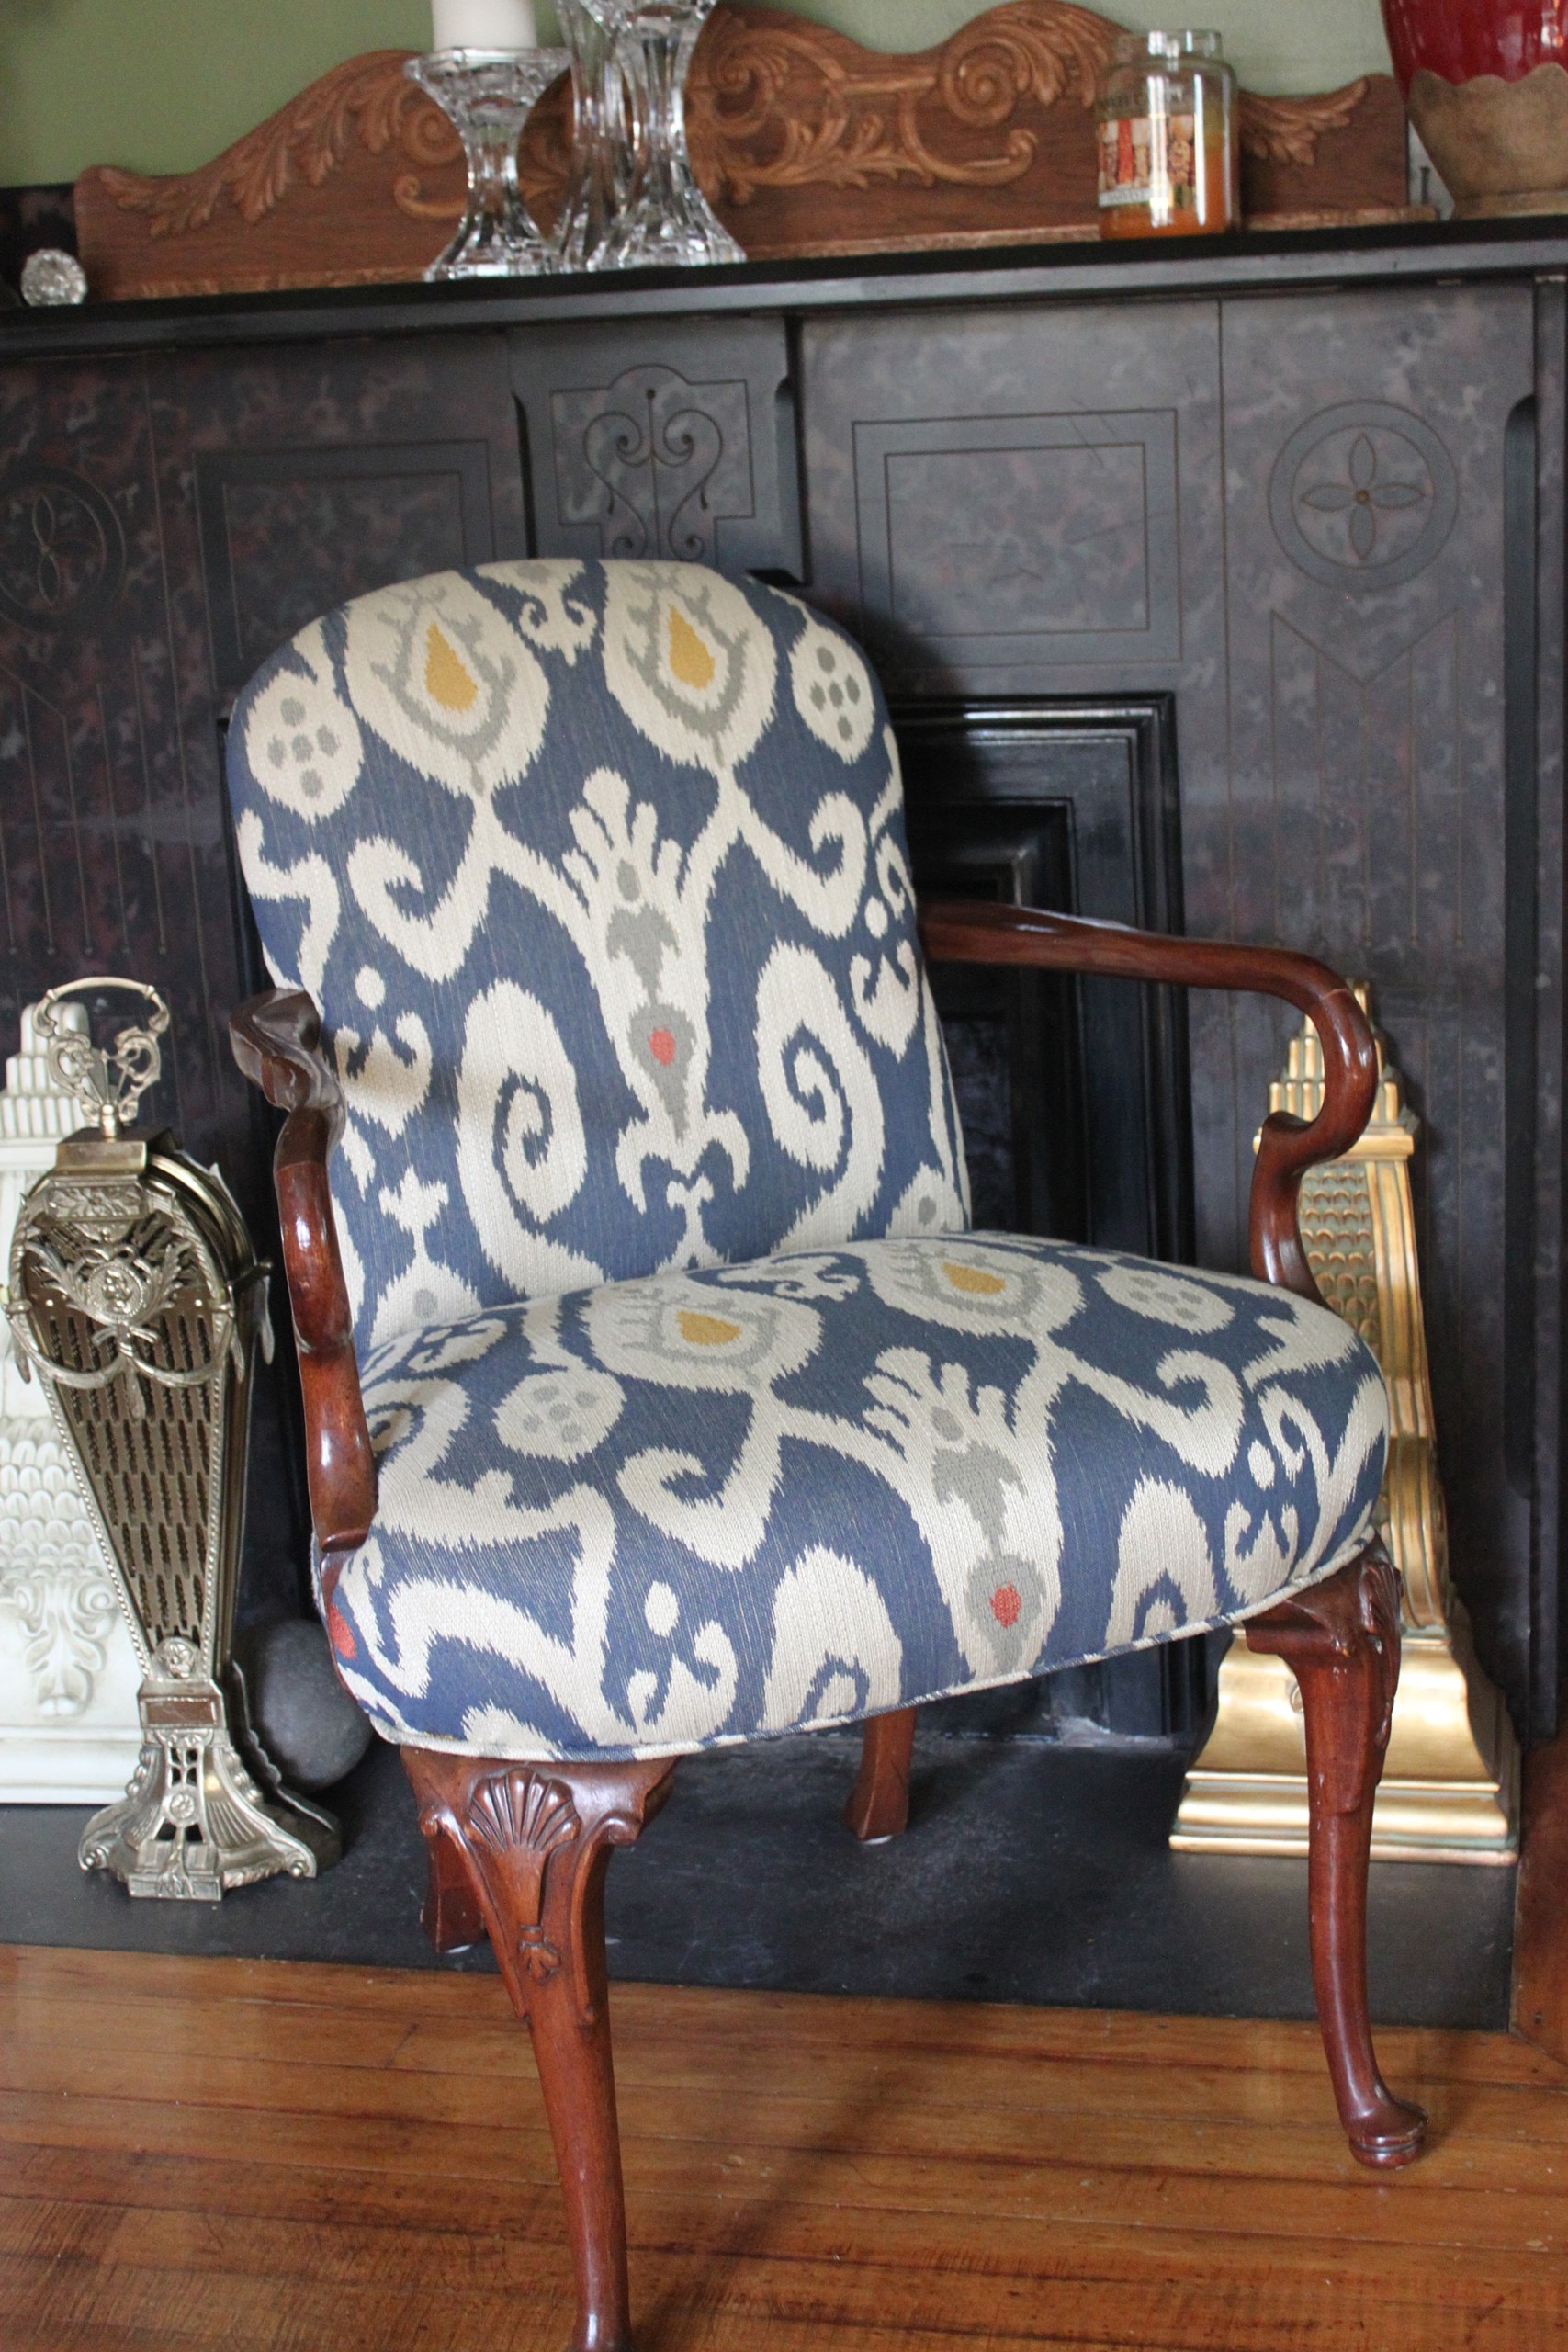 4 tips for choosing your first upholstery project